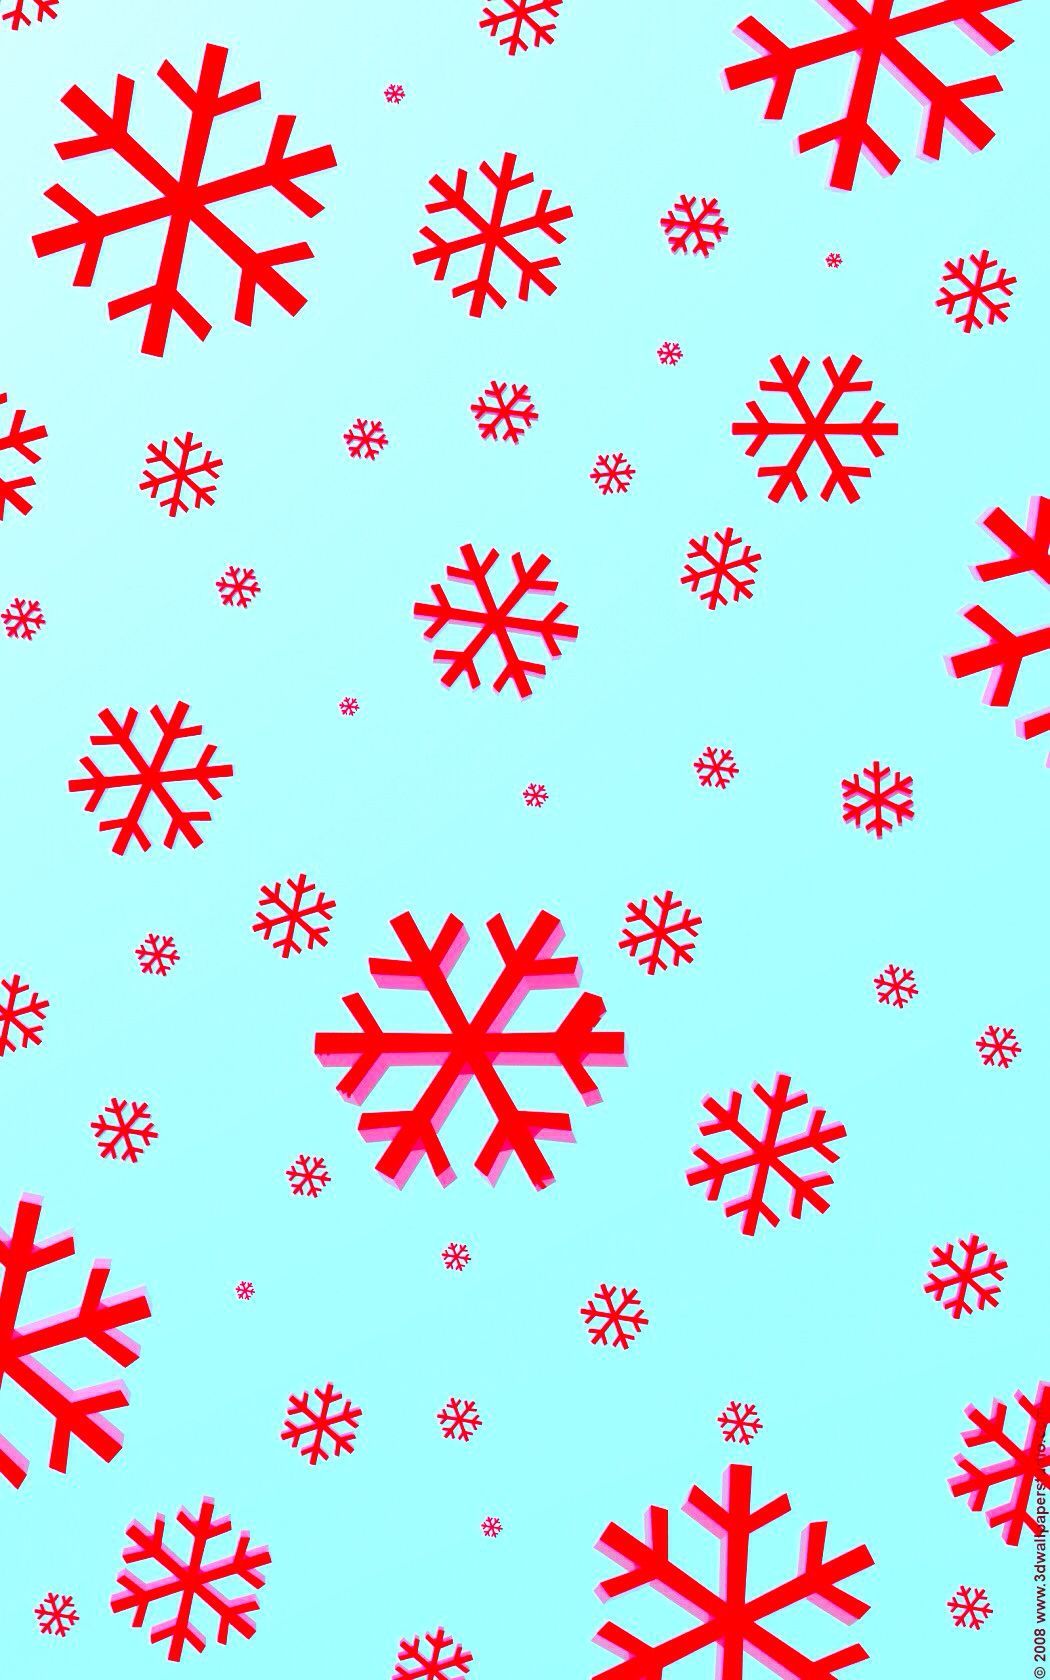 Bright red and blue snowflake iphone wallpaper. Wallpaper iphone christmas, iPhone wallpaper bright, Christmas wallpaper